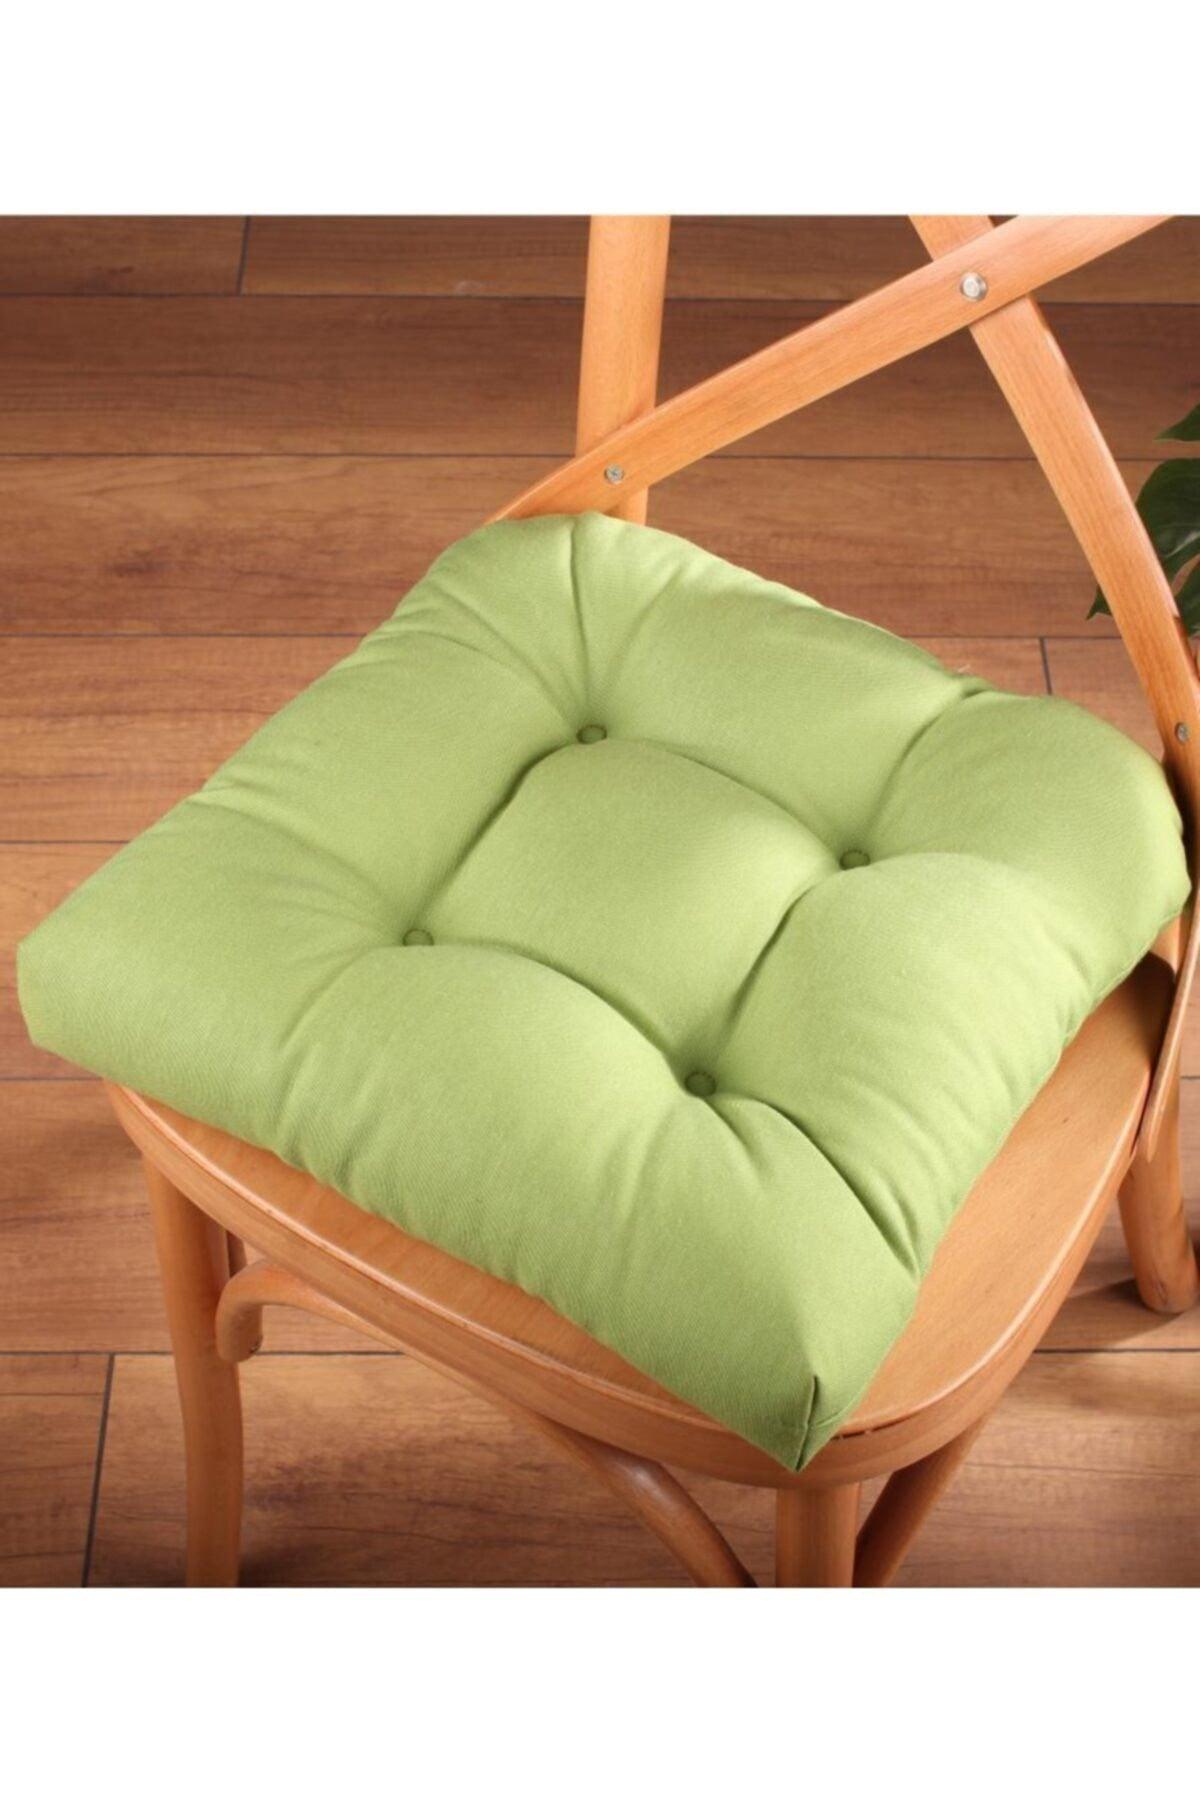 Lux Pofidik Green Chair Cushion Special Stitched Laced 40x40cm - Swordslife